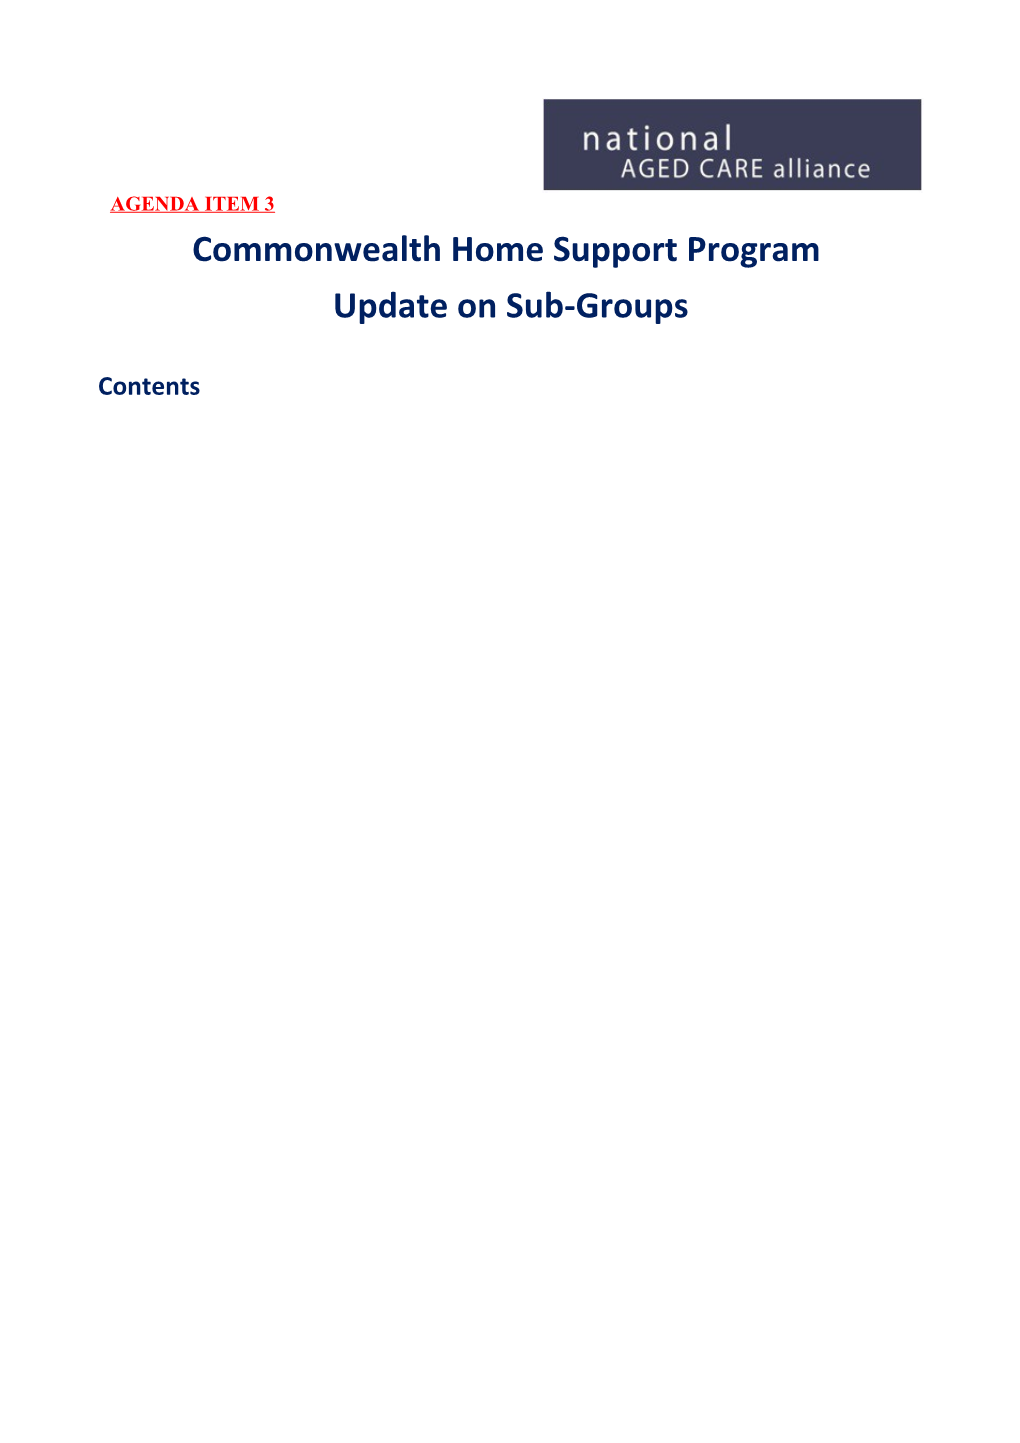 Commonwealth Home Support Program